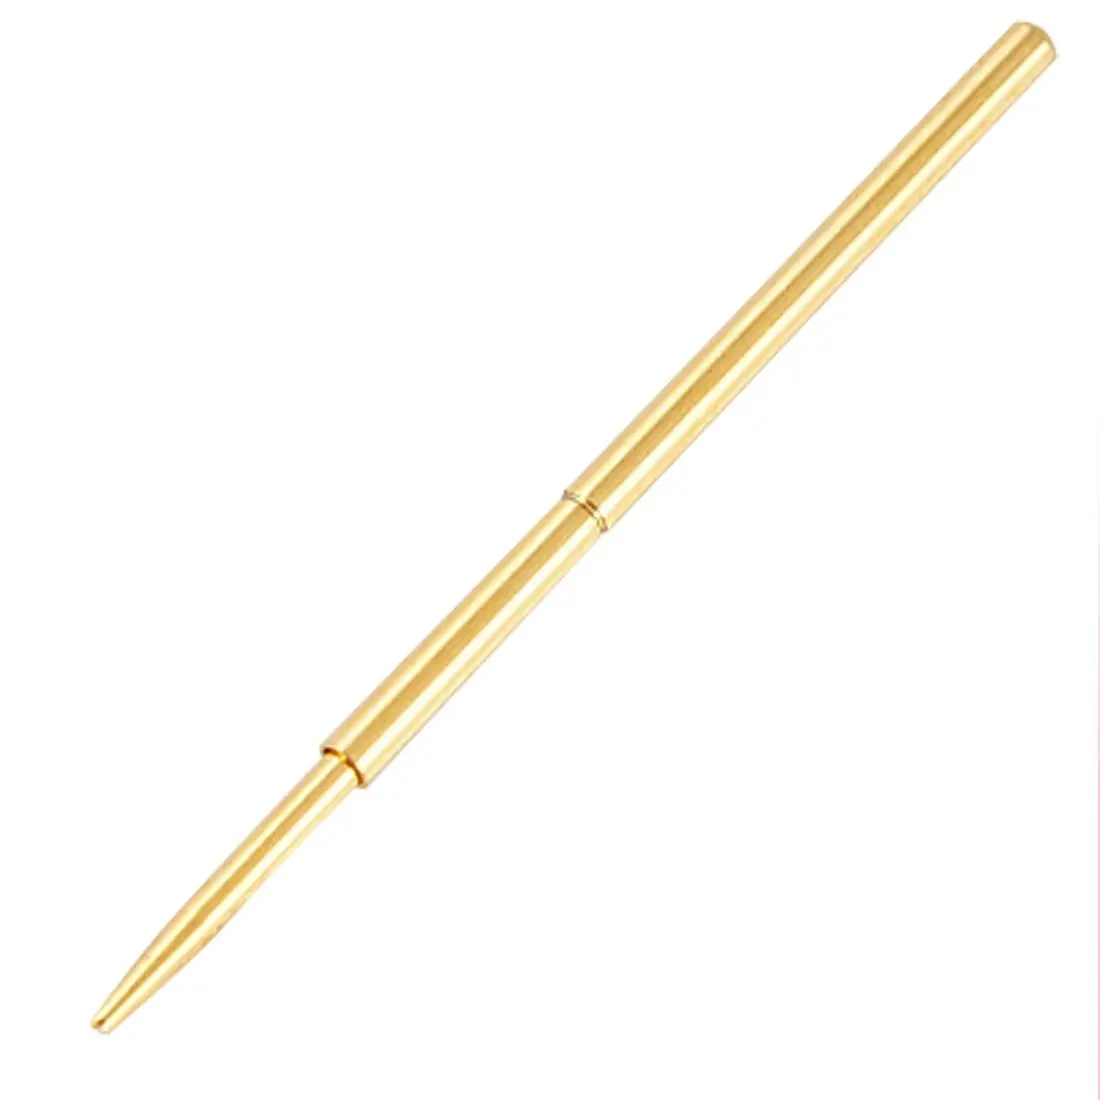 uxcell P125B Spear Tip Spring Loaded Test Probe Pin 33mm Length 60Pcs